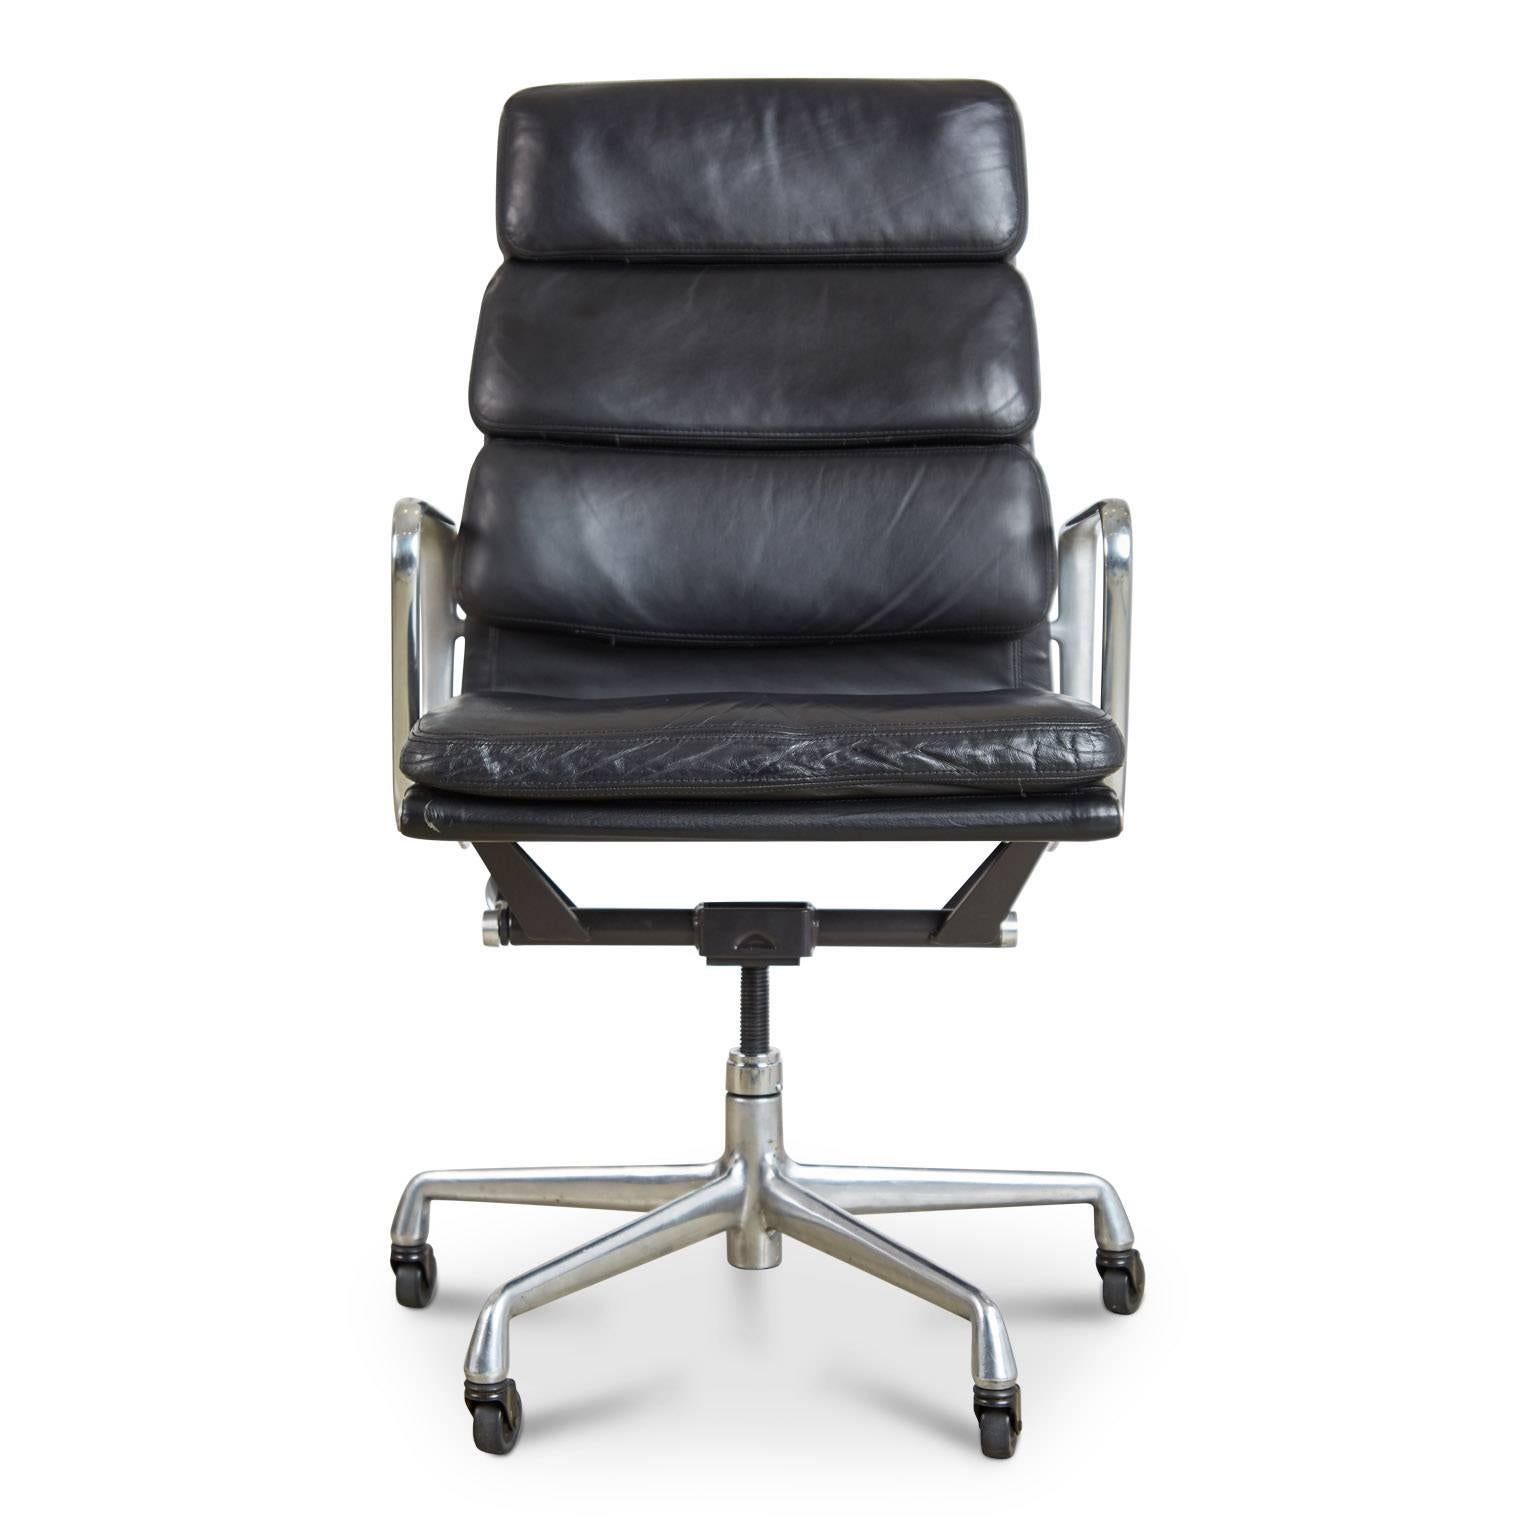 The clean, contemporary Silhouette of this iconic soft pad executive task or desk chair for Herman Miller is a perfect example of Charles & Ray Eames unparalleled designs. This rarely seen with casters desk chair was originally designed as a